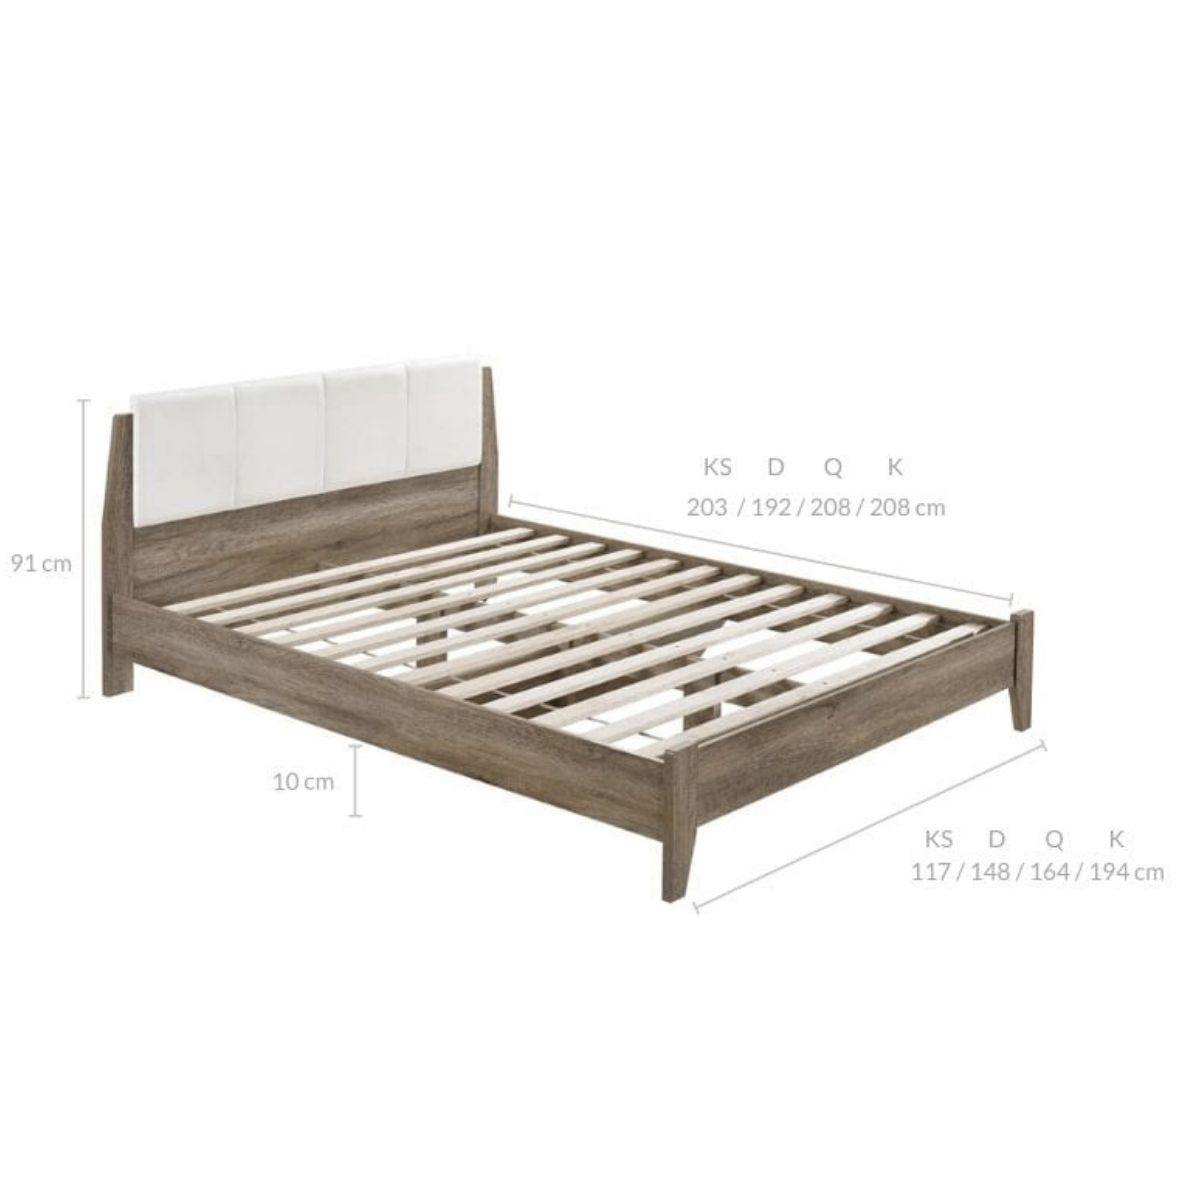 Scandi Wooden Bed Frame with Leather Upholstered Bed Head King - Evopia